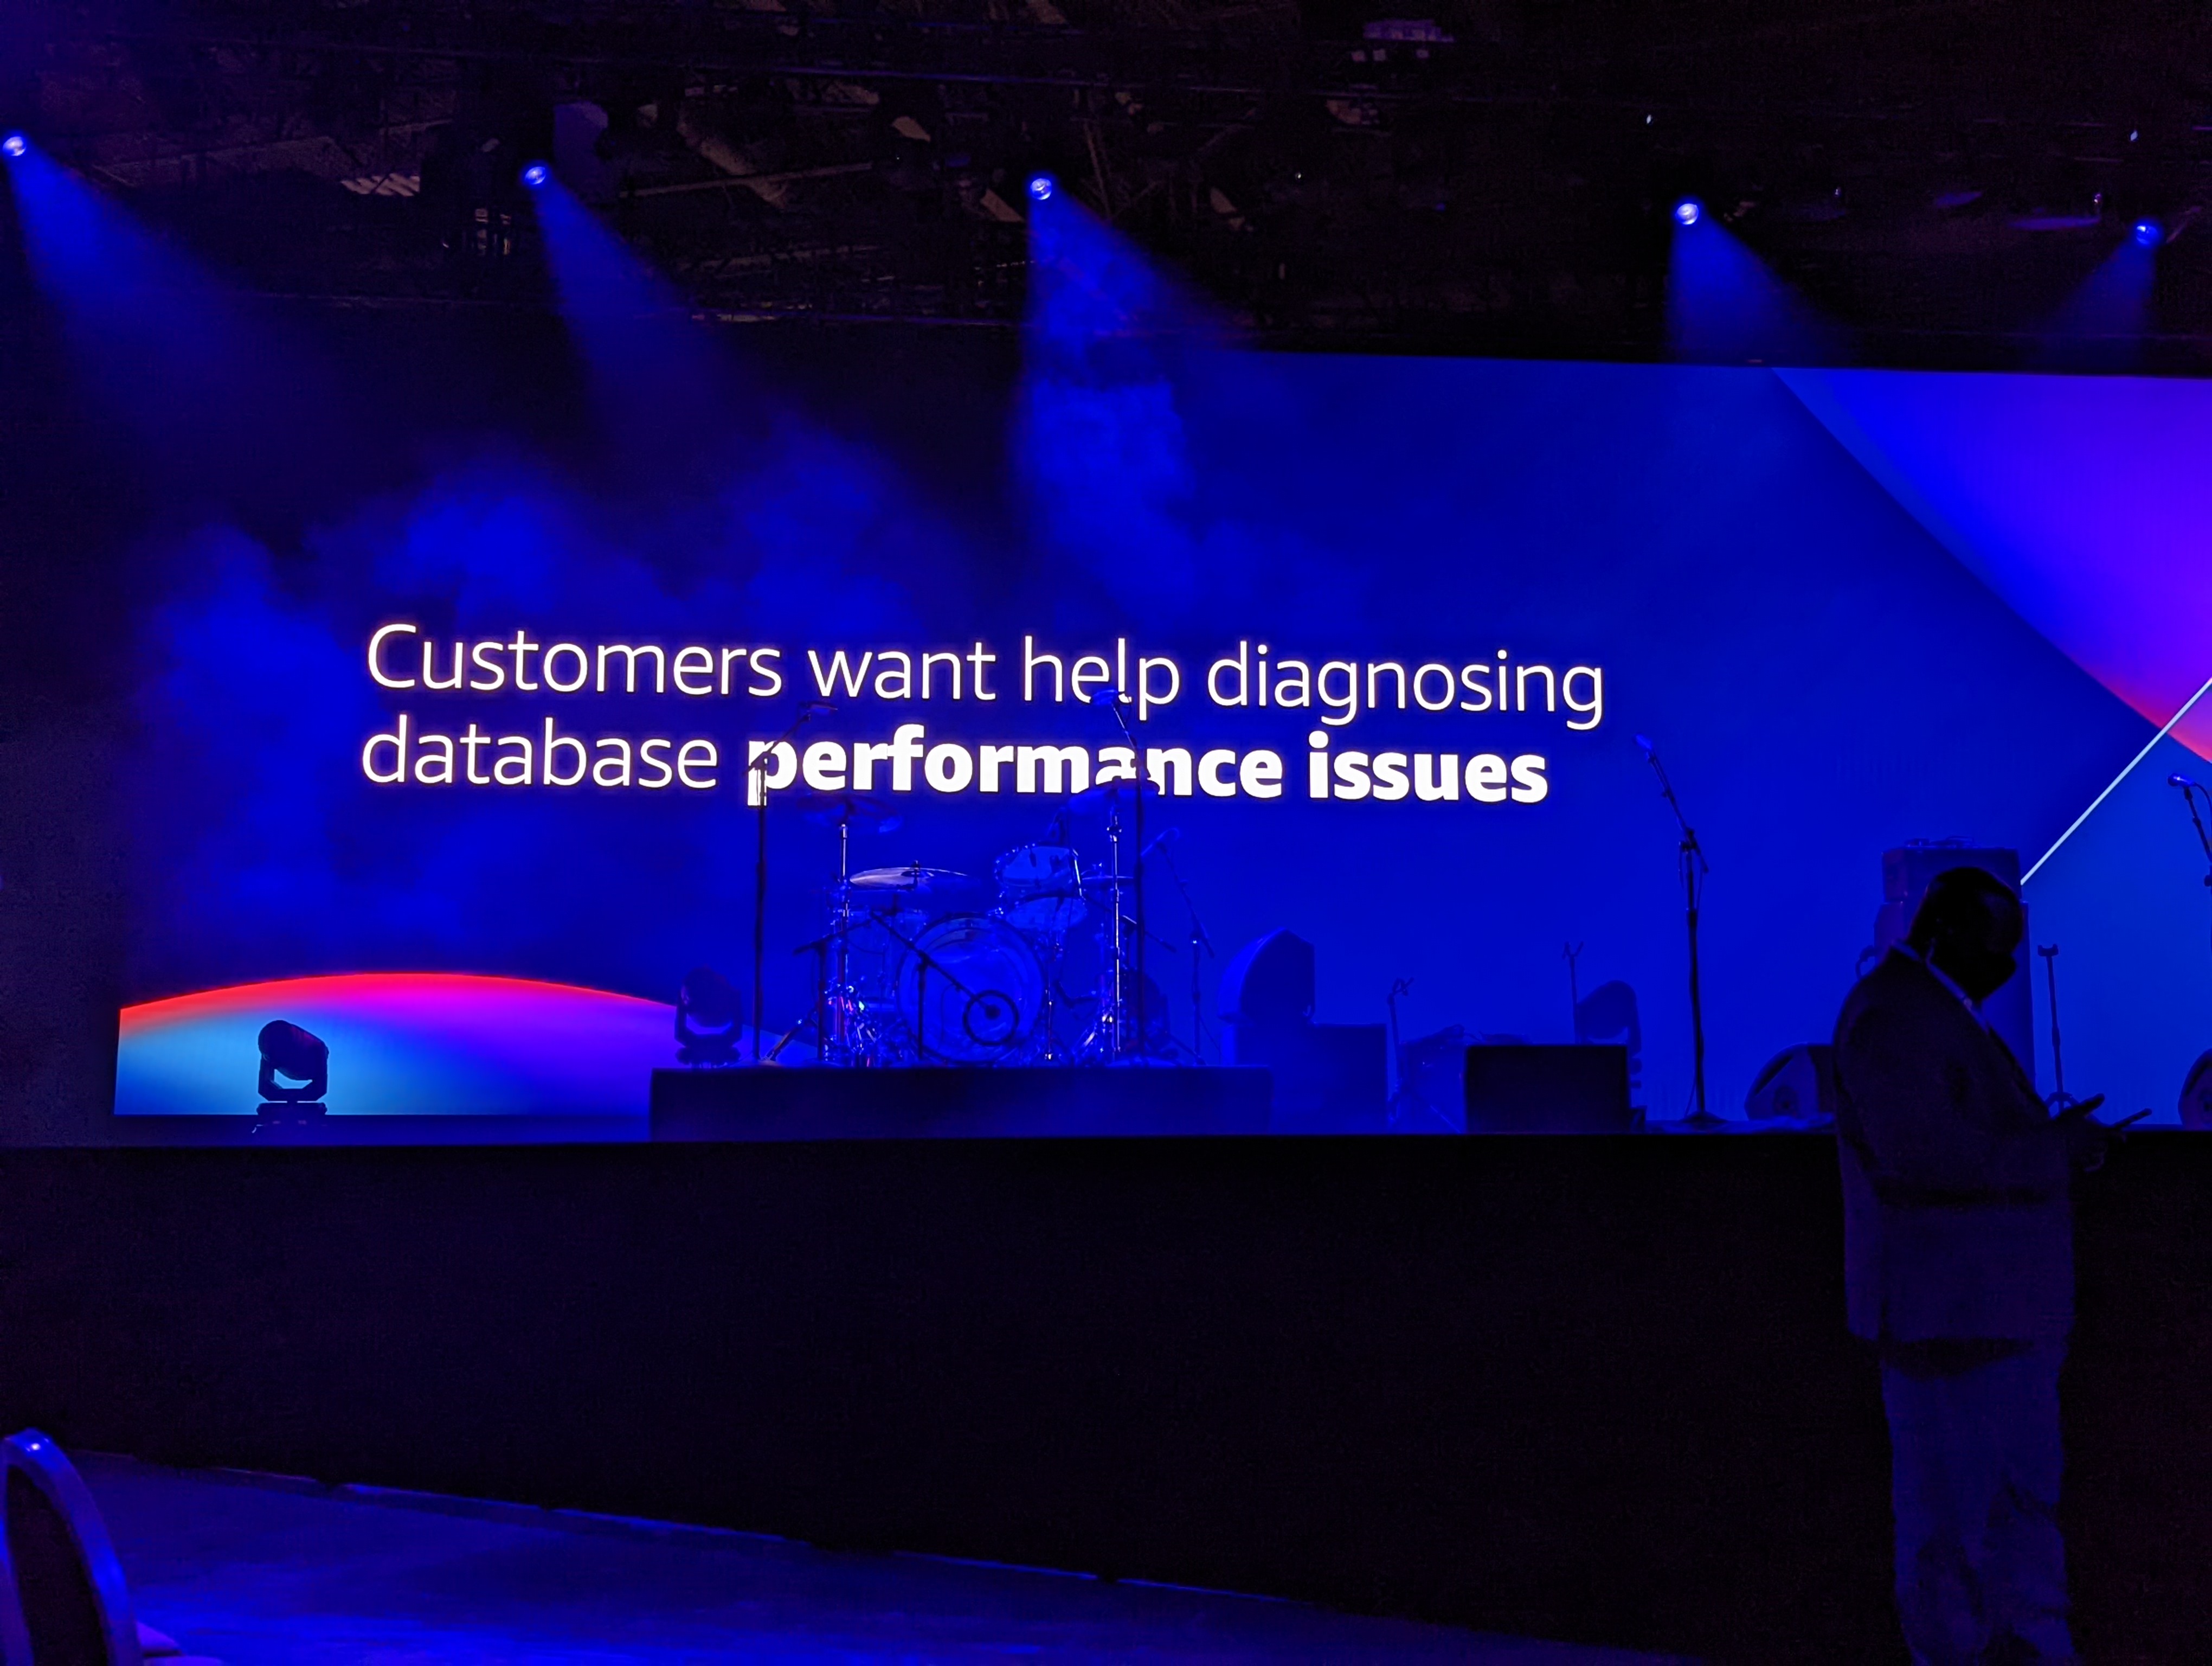 AWS launches a new tool for diagnosing and fixing database issues in its cloud